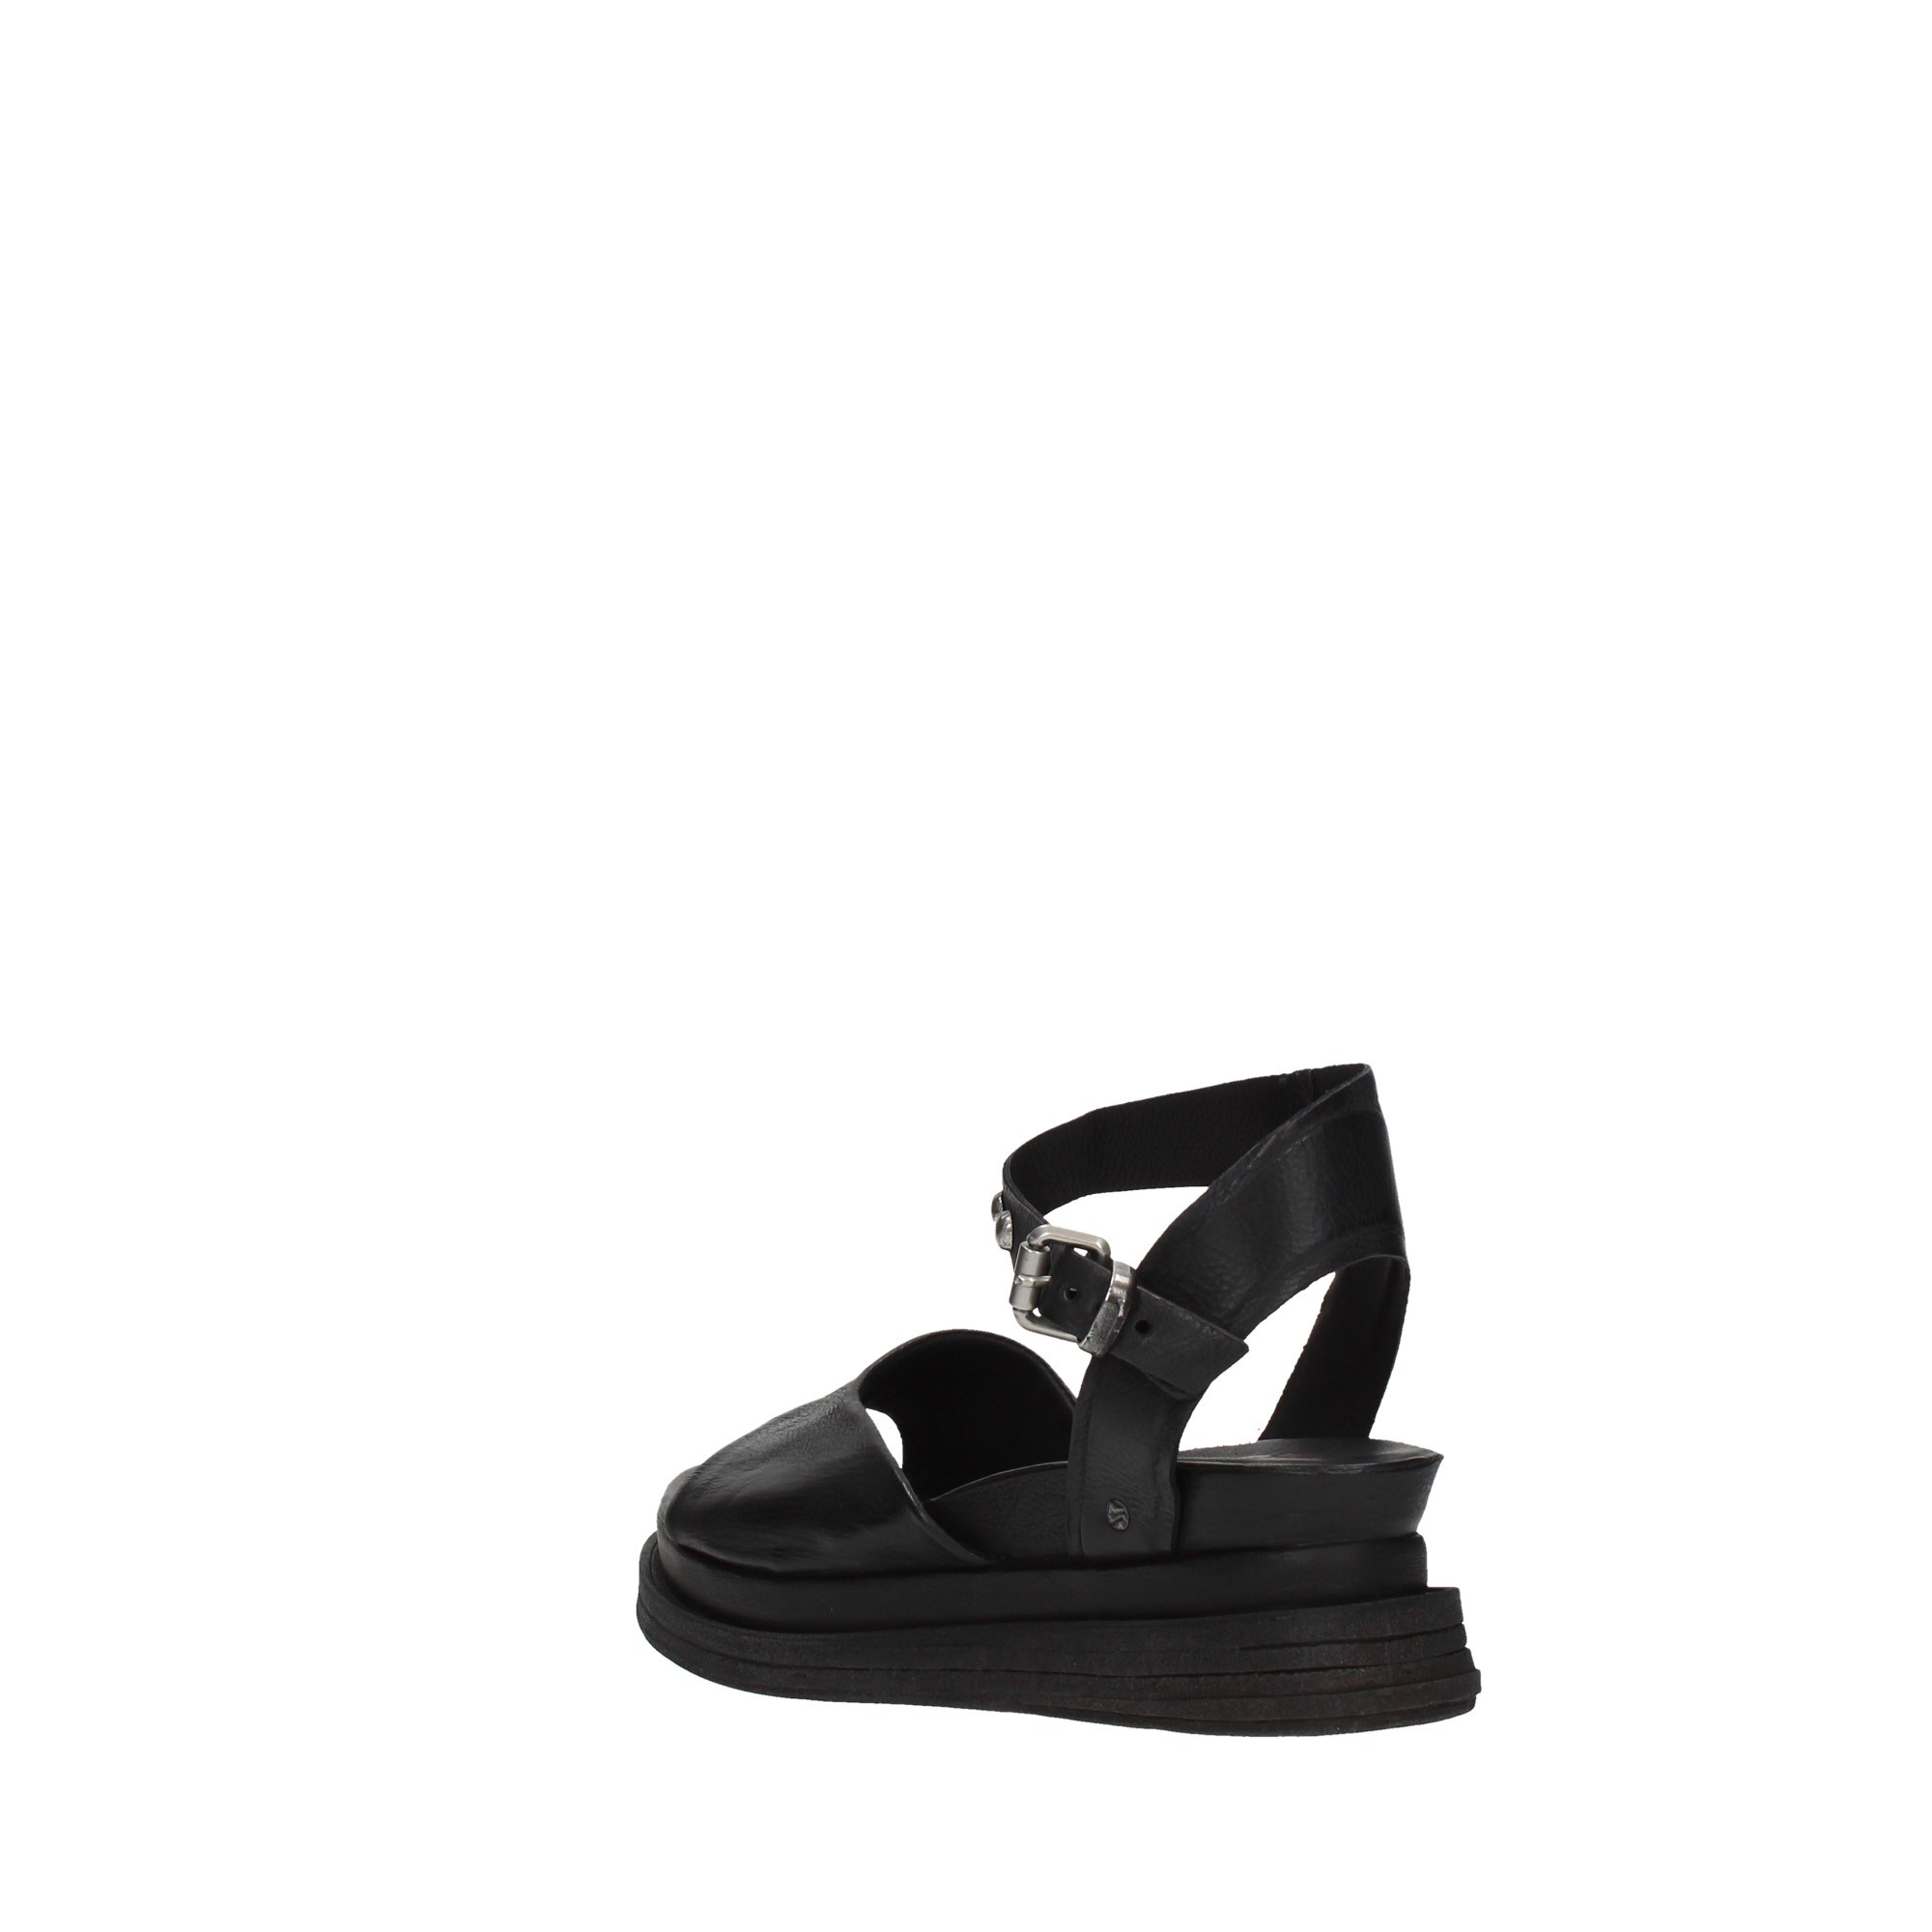 As98 Shoes Women Wedge Sandals A15025